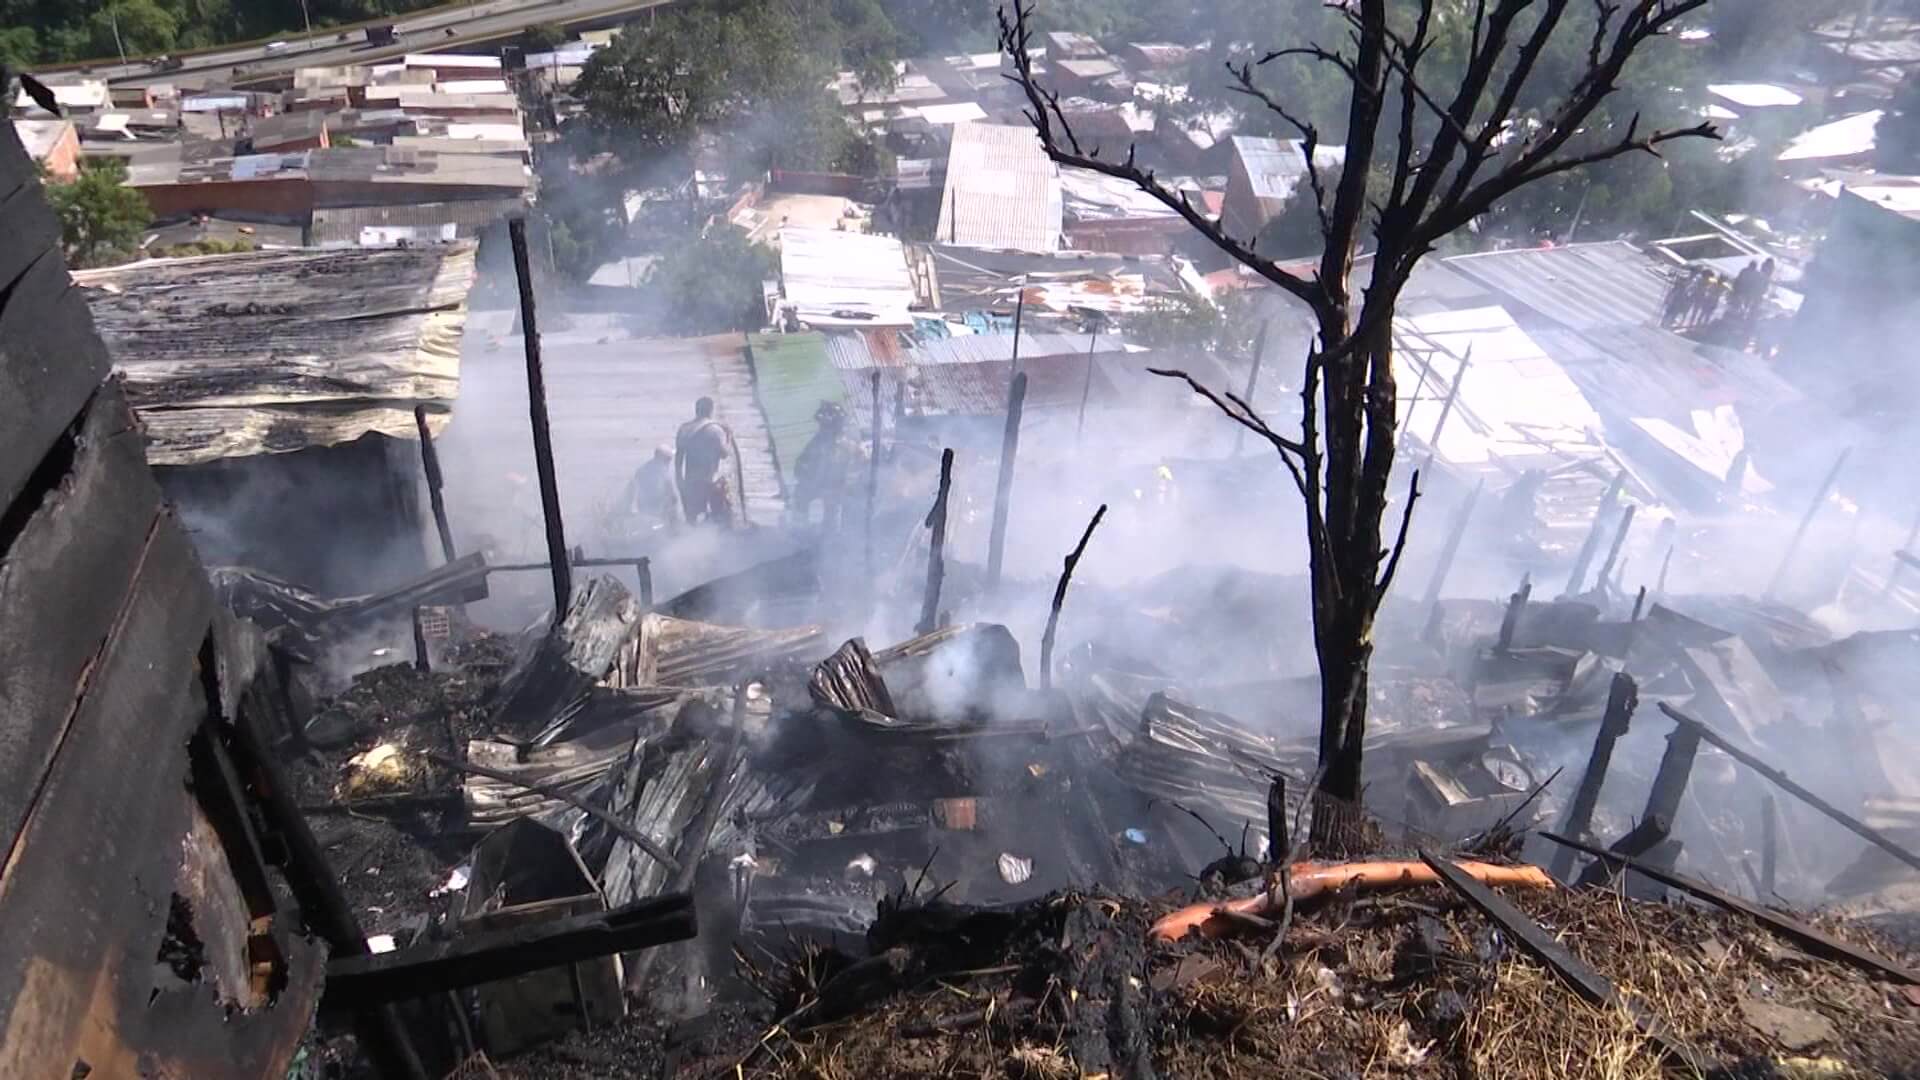 More than 20 homes consumed by fire